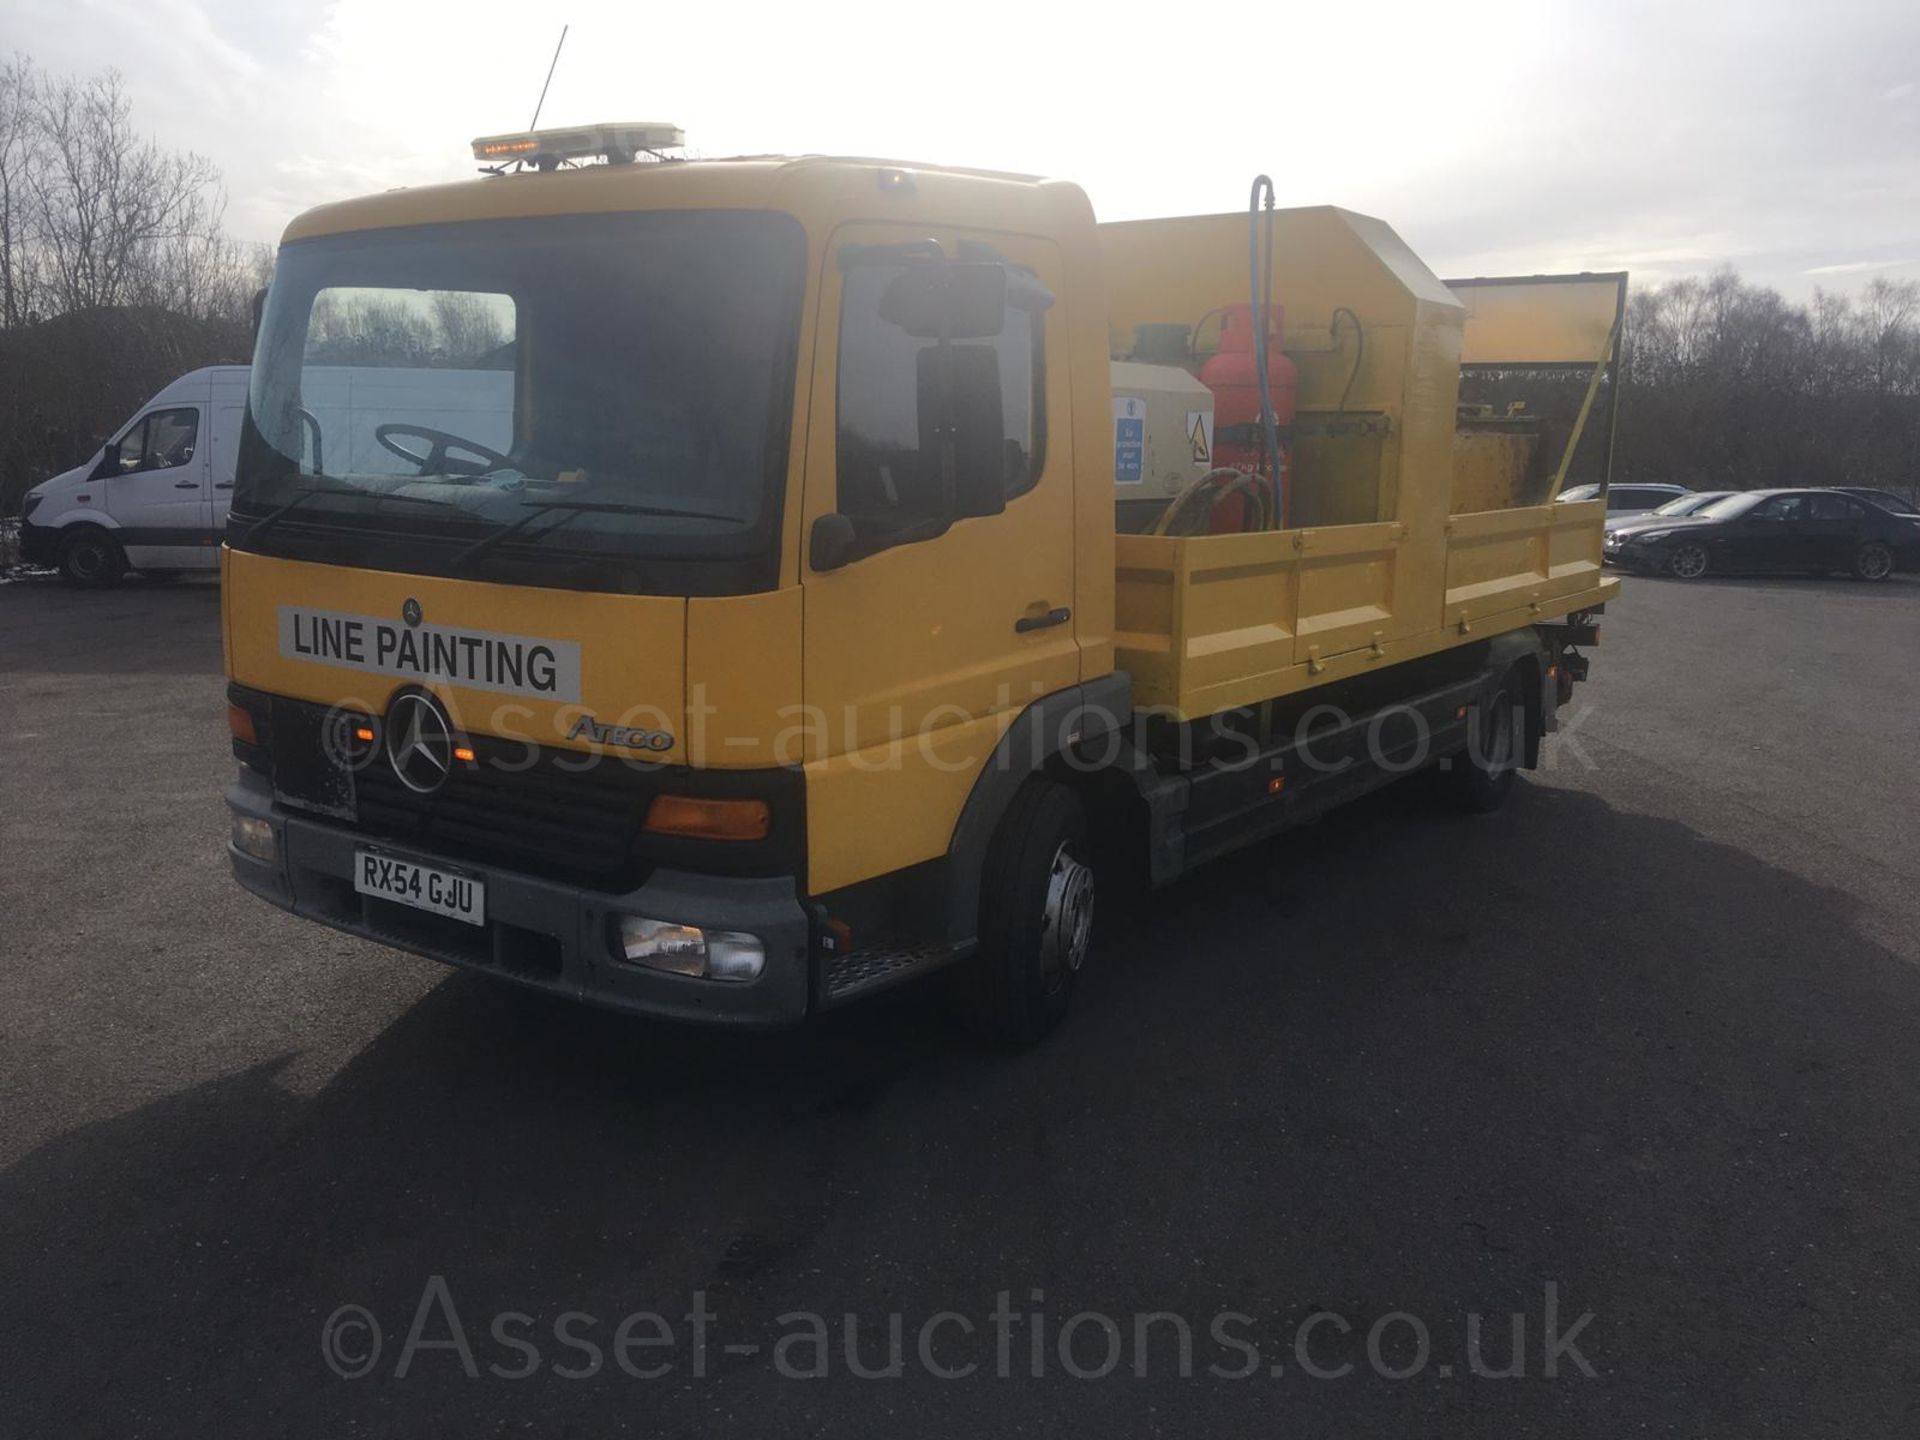 2004/54 REG MERCEDES ATEGO 1018 DAY YELLOW DROPSIDE LINE PAINTING LORRY 4.3L DIESEL ENGINE *NO VAT* - Image 4 of 128